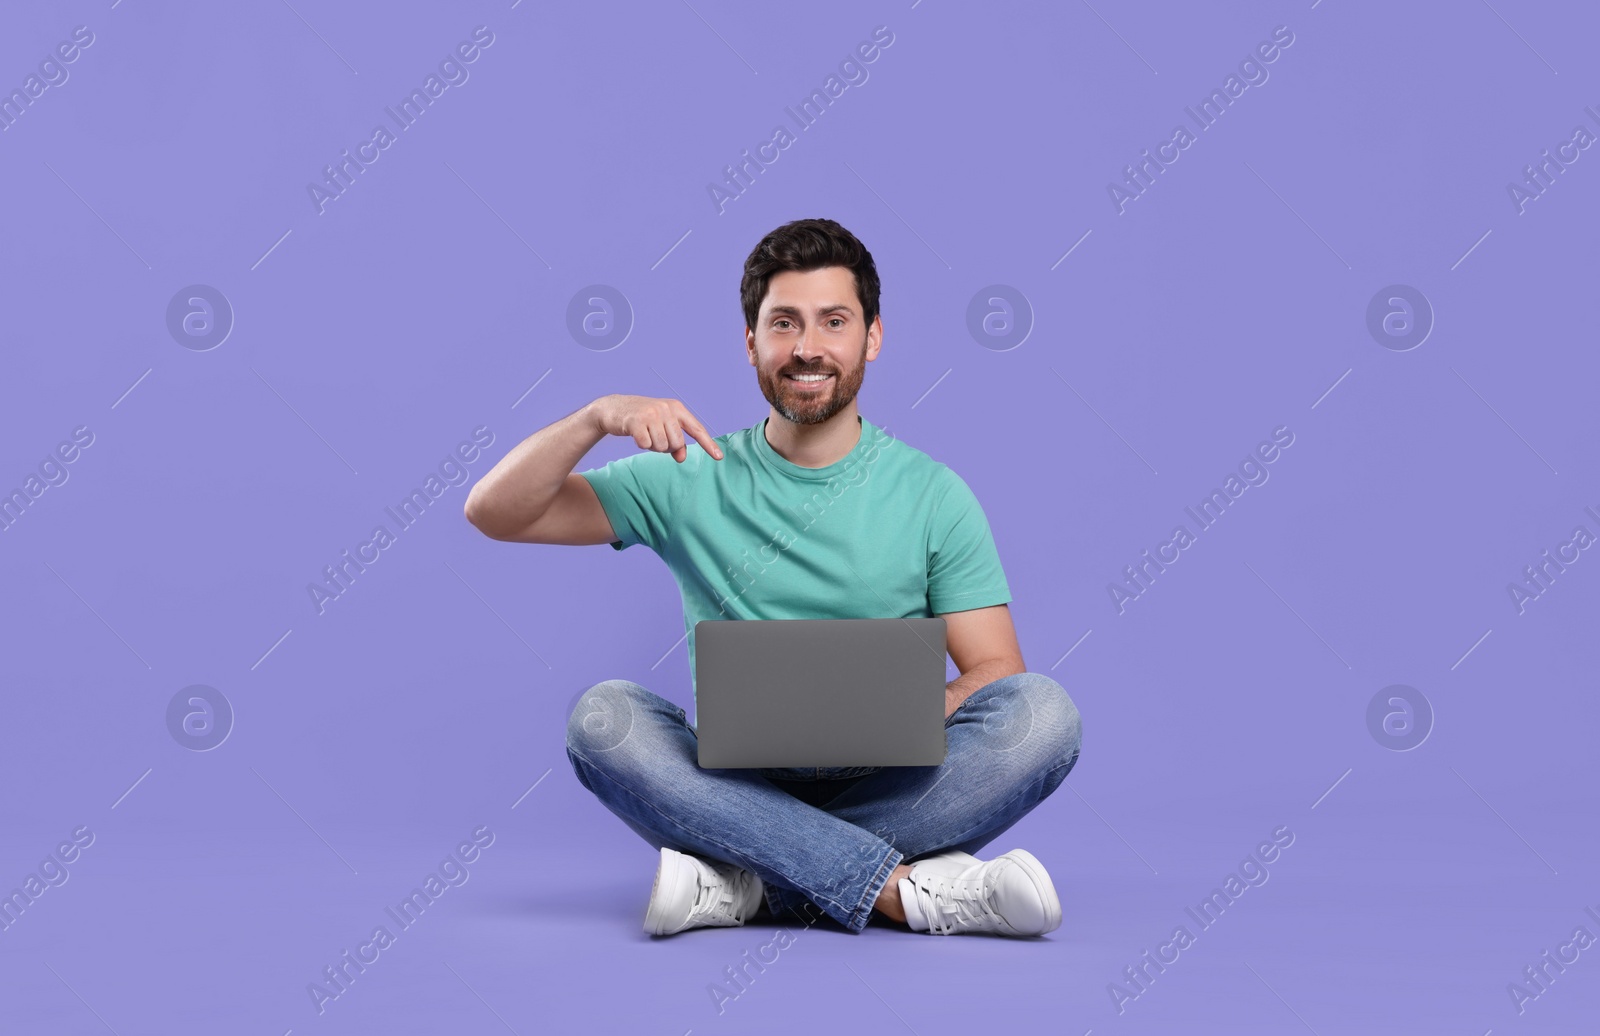 Photo of Happy man with laptop on purple background